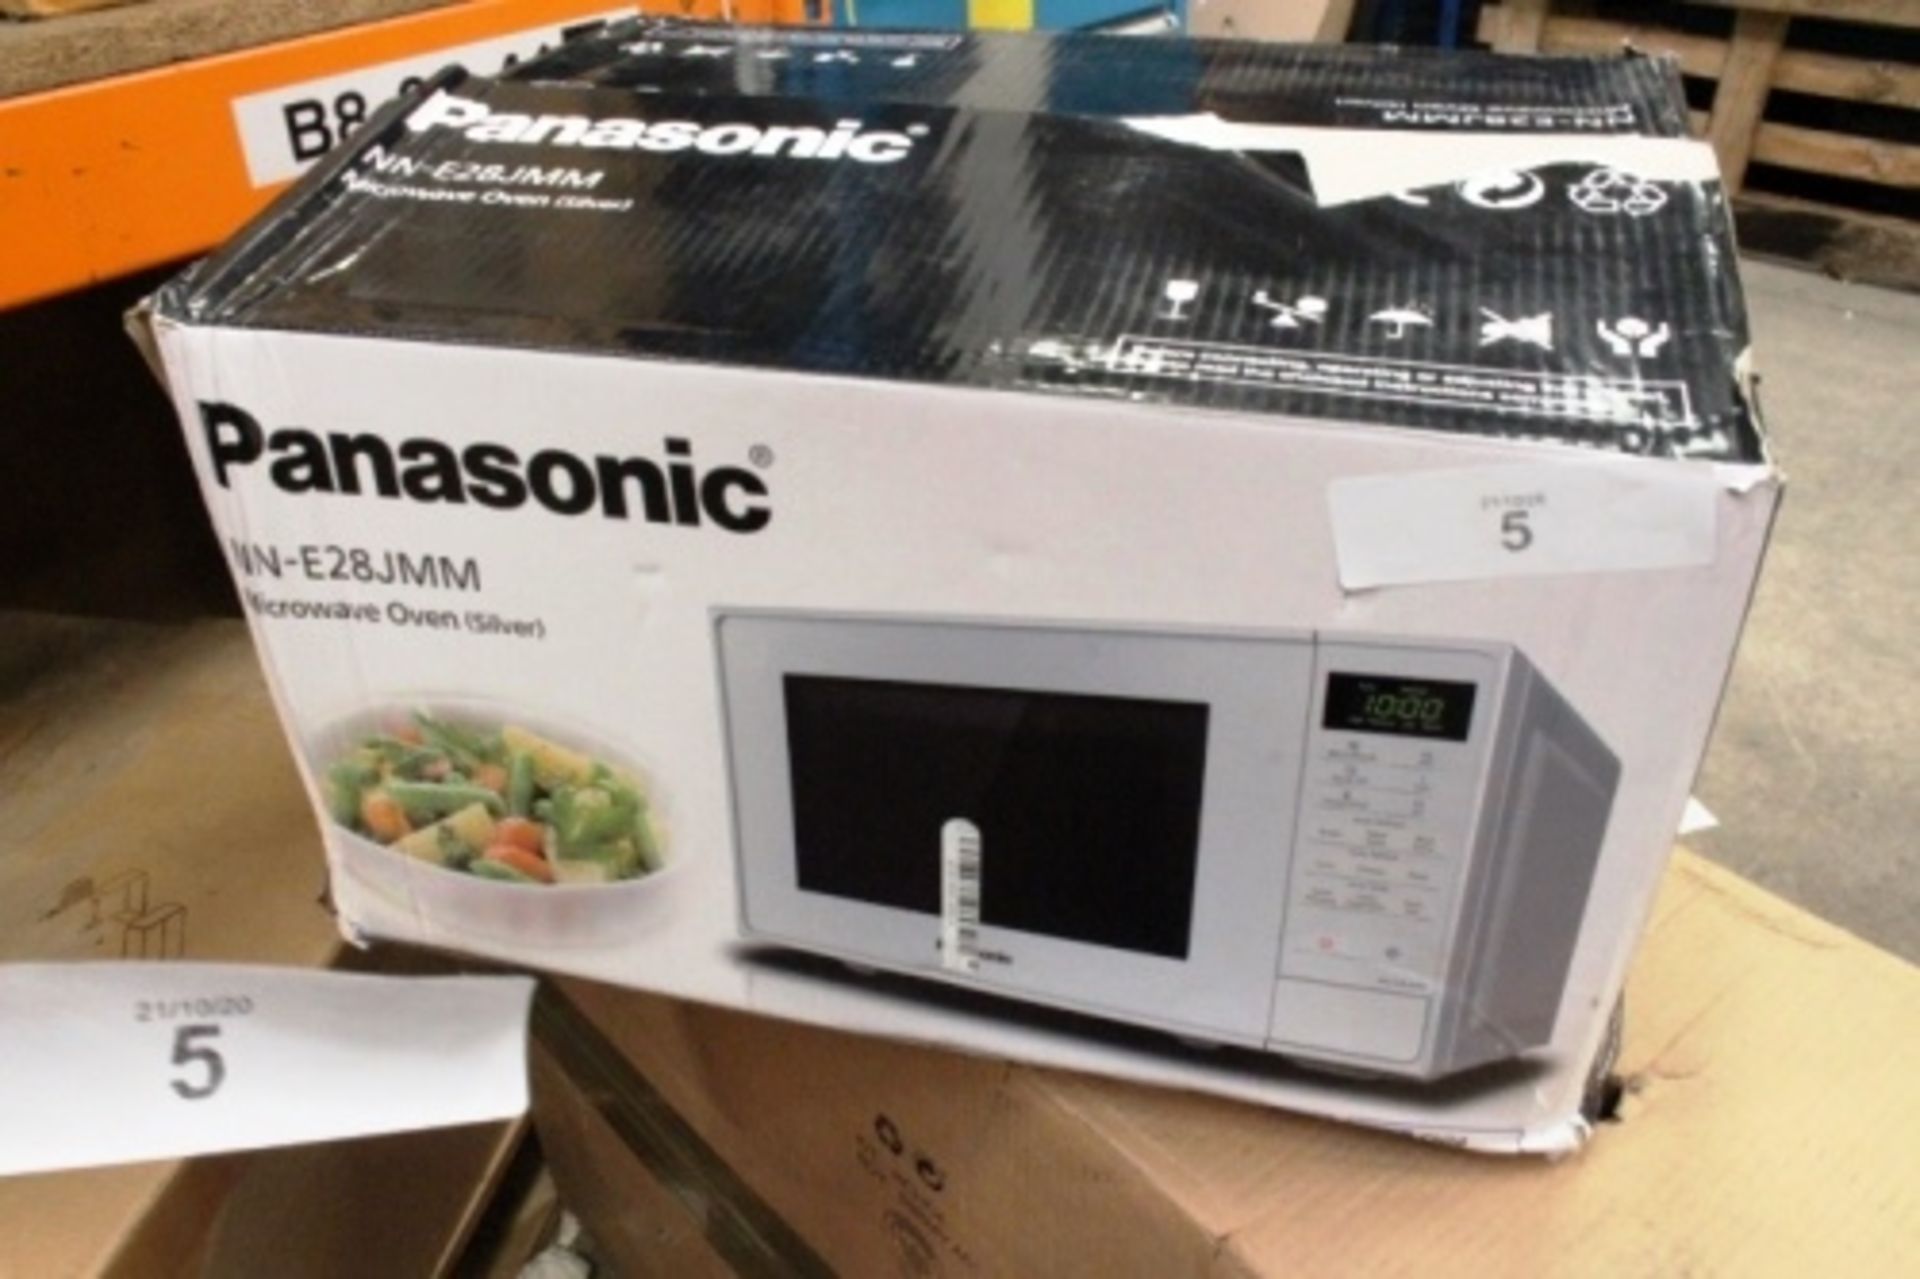 Panasonic silver microwave oven, model NN-E28JMM - New, dented and scratched, customer return (ES2)